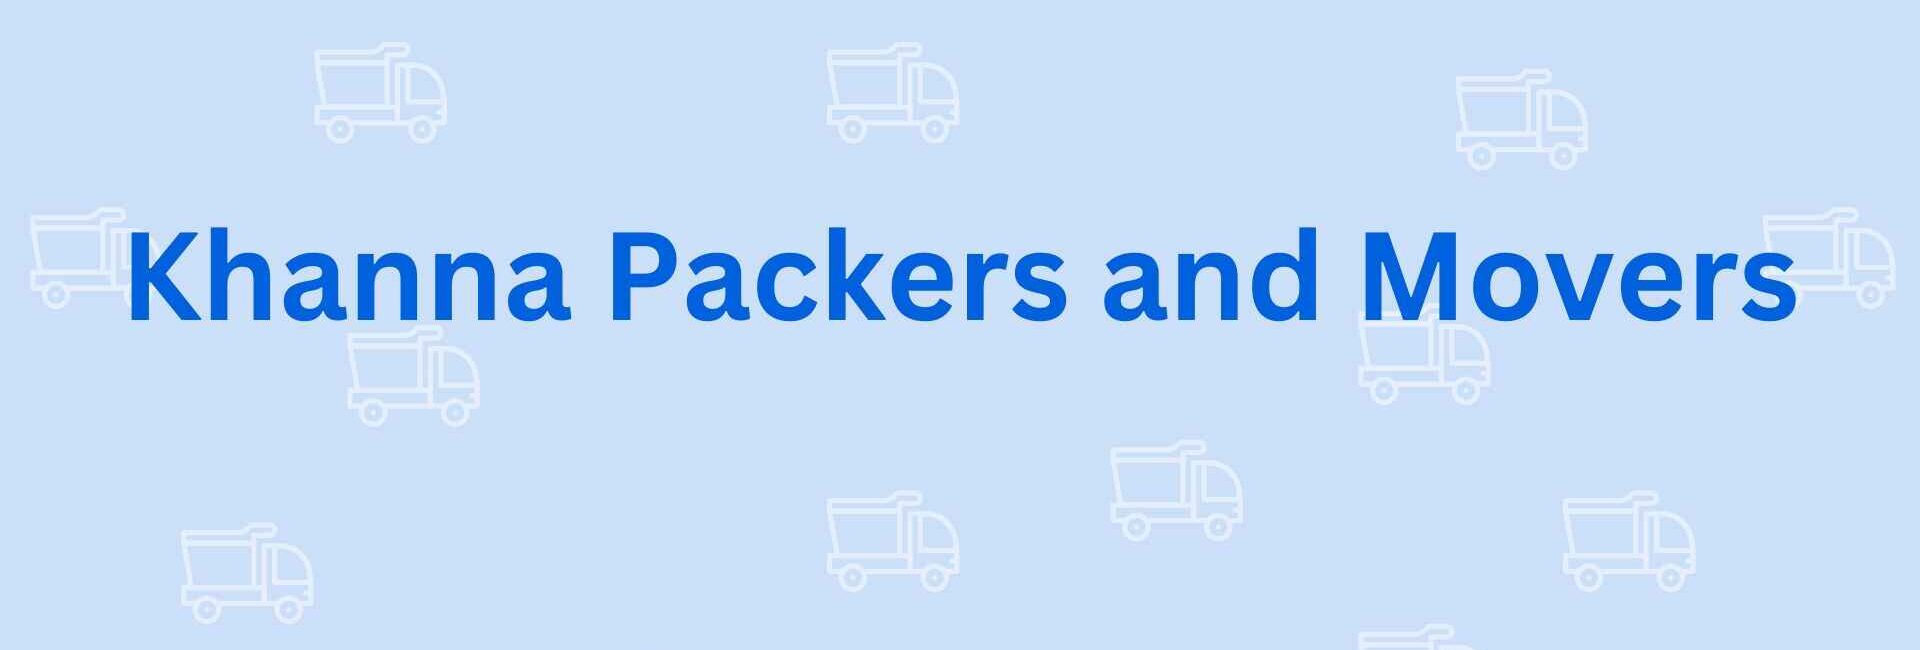 Khanna Packers and Movers - Packers and Movers in Noida